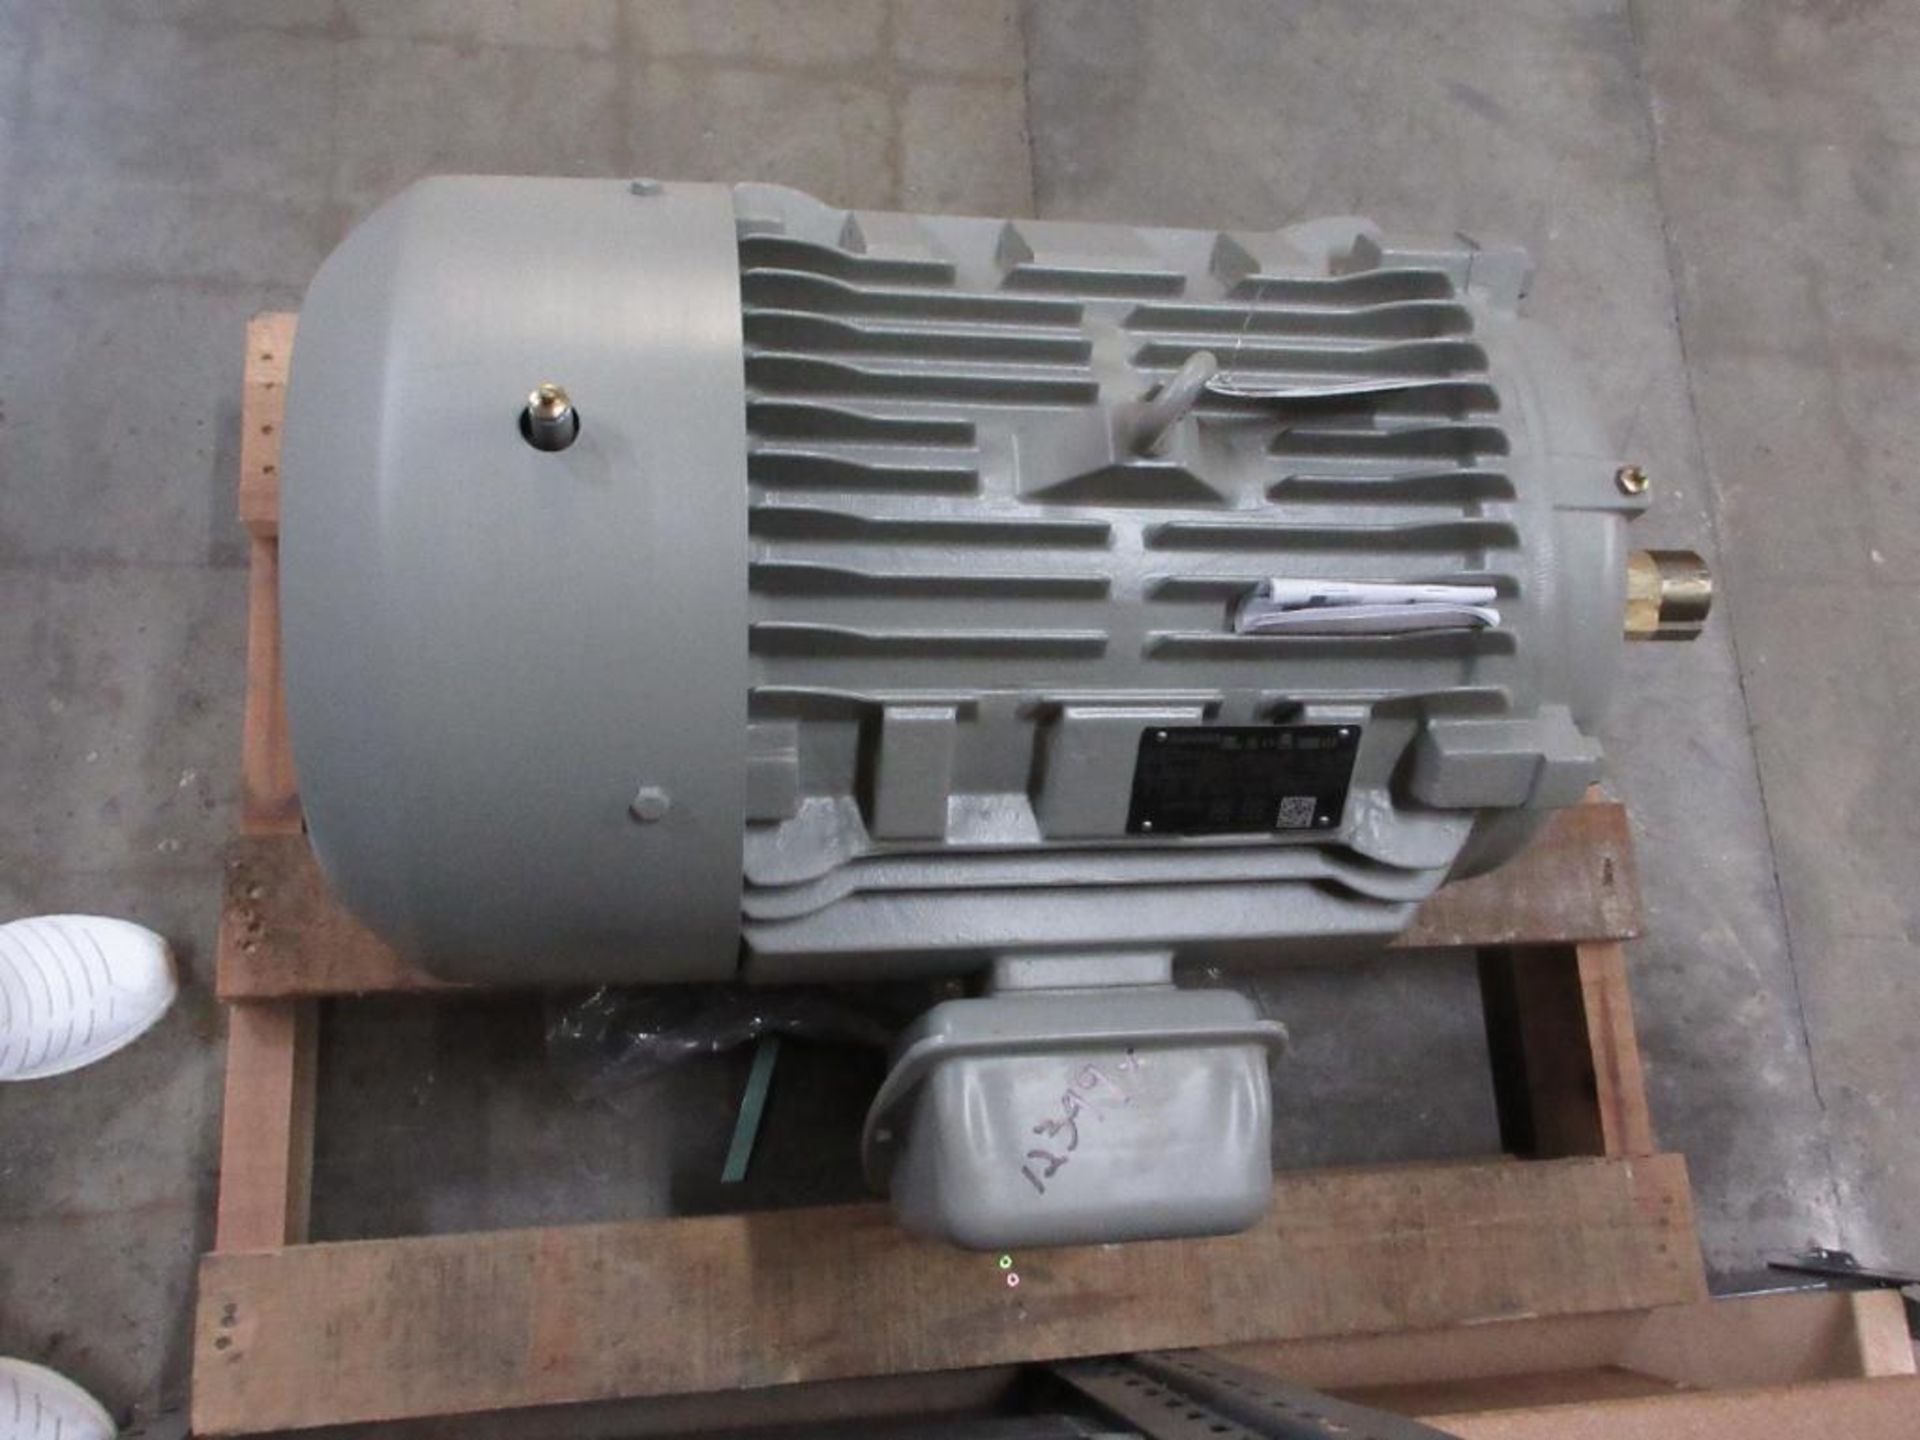 SIEMENS MOTOR 40HP 3 PHASE 1800RPM FRAME 324T P/N 1LE22213AB116AA3 TYPE GP100 (THIS LOT IS FOB CAMAR - Image 7 of 9